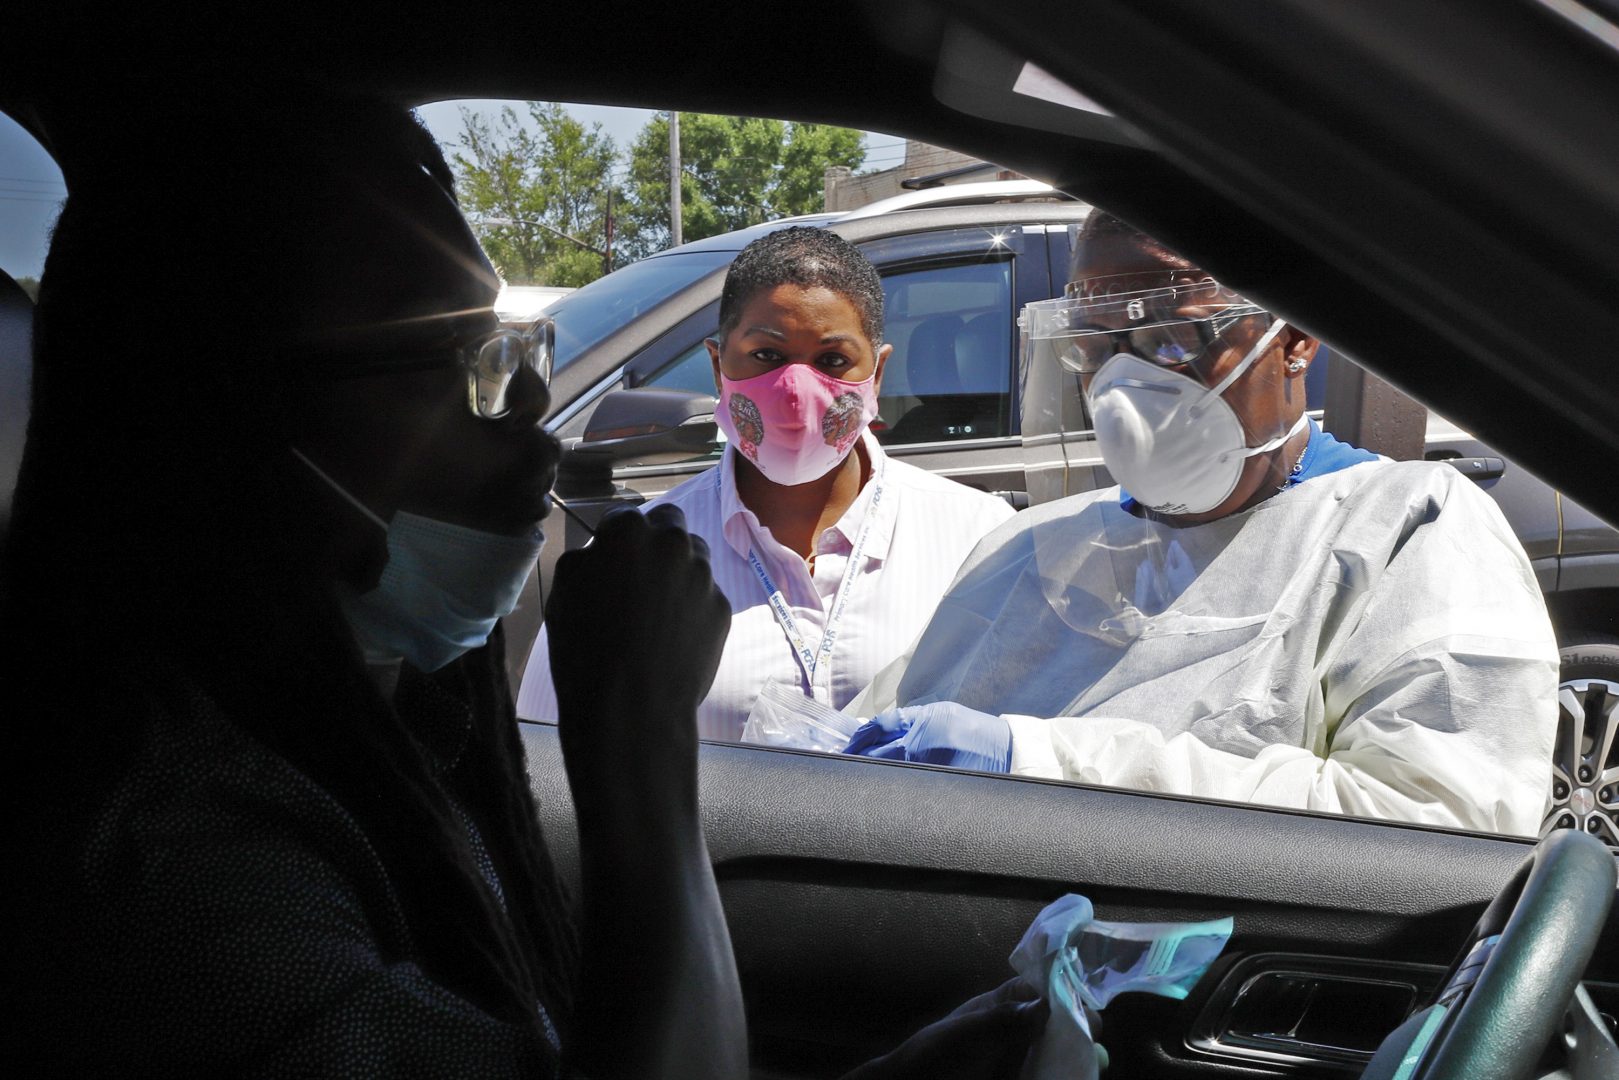 In this photo made on Monday, July 20, 2020, Kiva A. Fisher-Green, center, watches as nurse Ruth John, right, takes a sample from Walter Lewis for a COVID-19 test in the driveway of the Alma Illery Medical Center in the Homewood neighborhood of Pittsburgh.